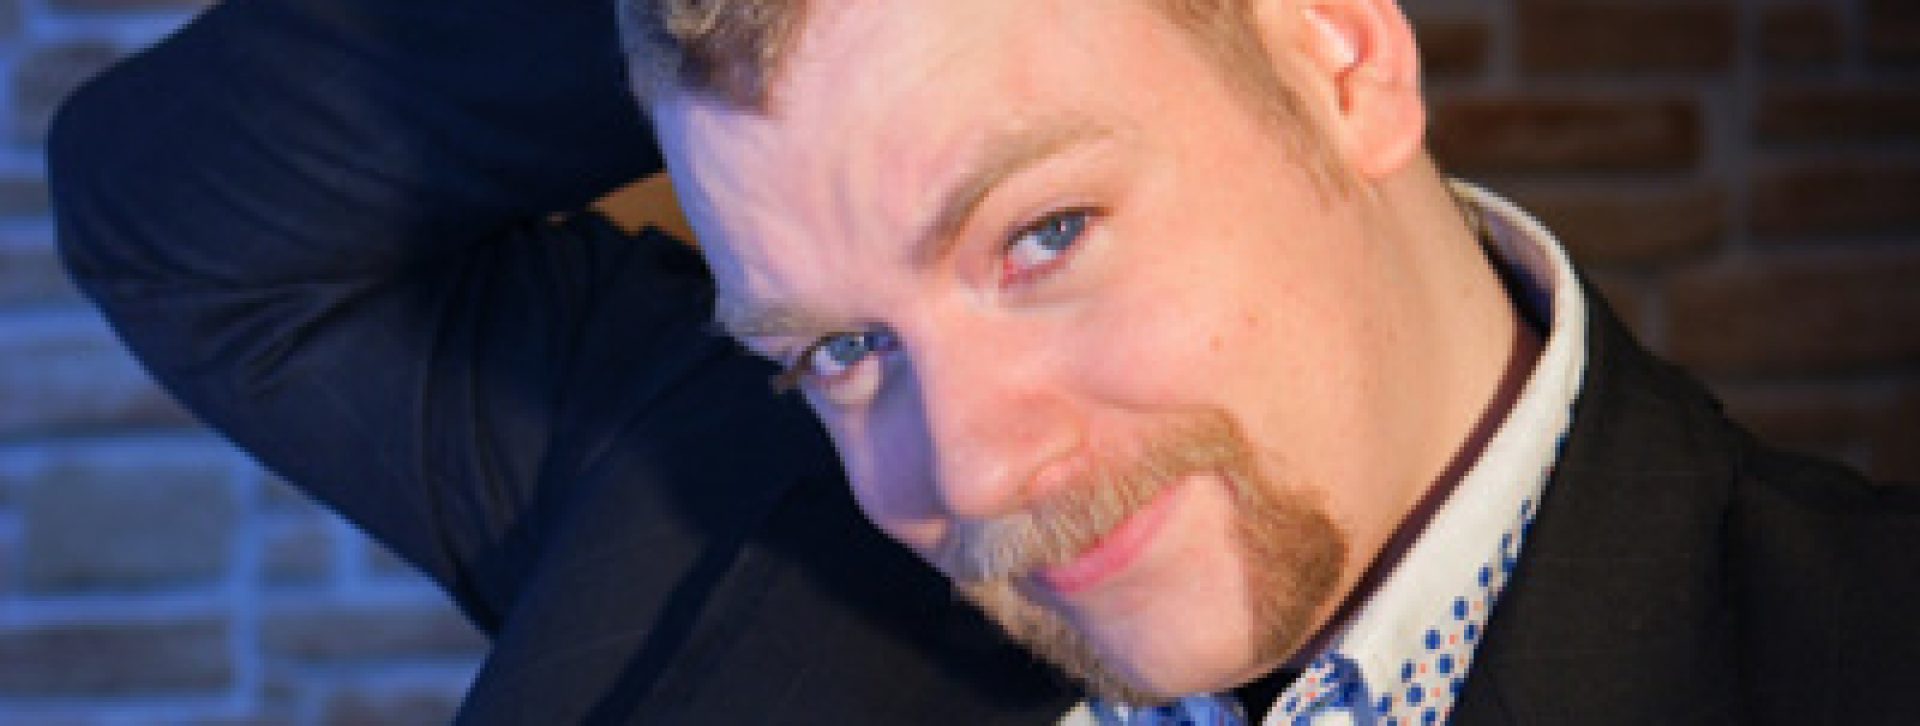 Comedian and actor Rufus Hound makes his Pantomine debut this Christmas!